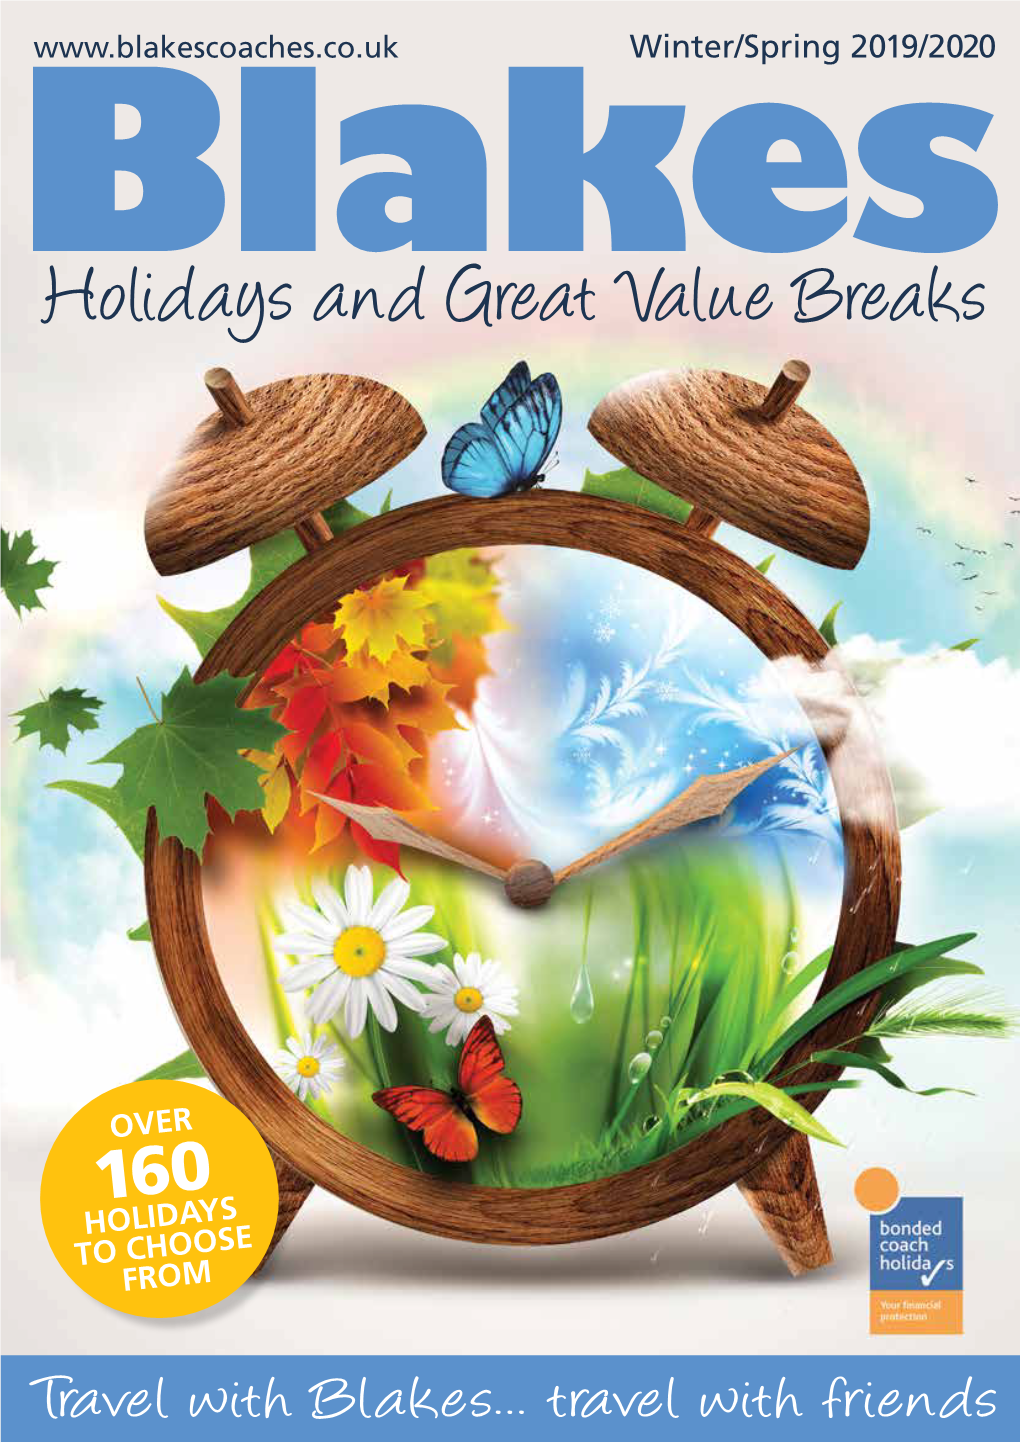 Holidays and Great Value Breaks